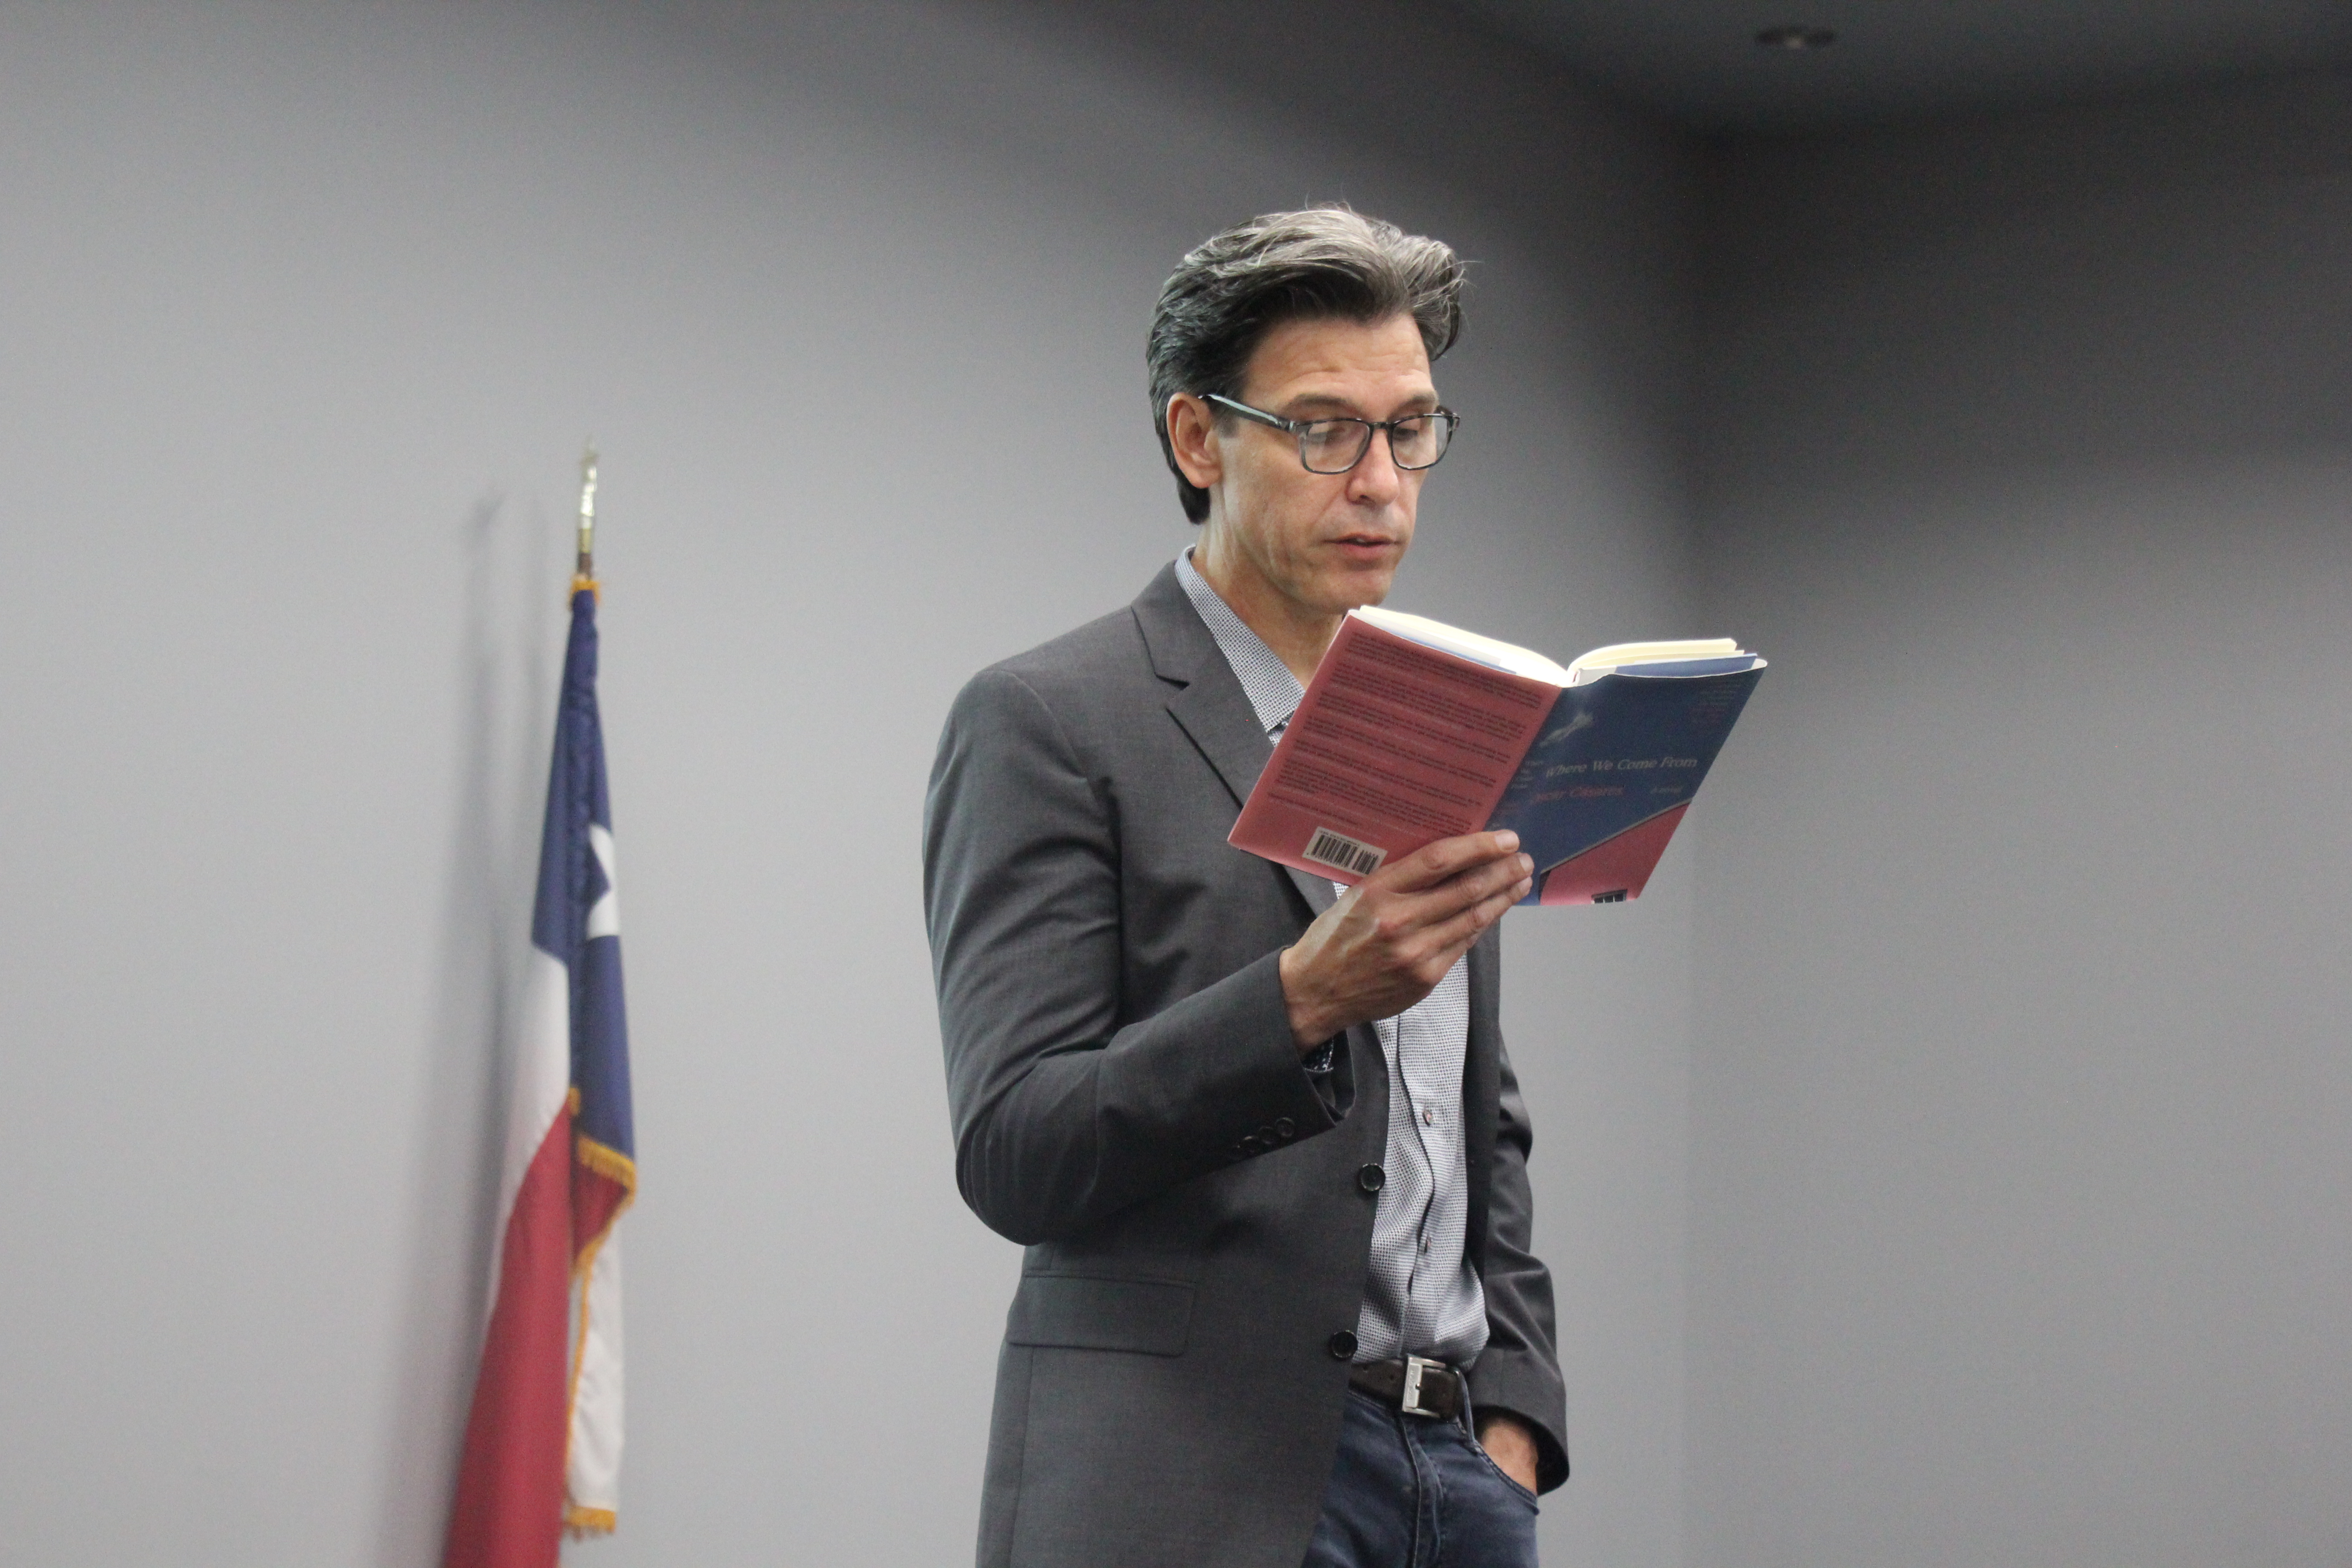 Author Oscar Casares reads from his newest book, "Where We Come From," on May 30 at the Center for Economic Development.